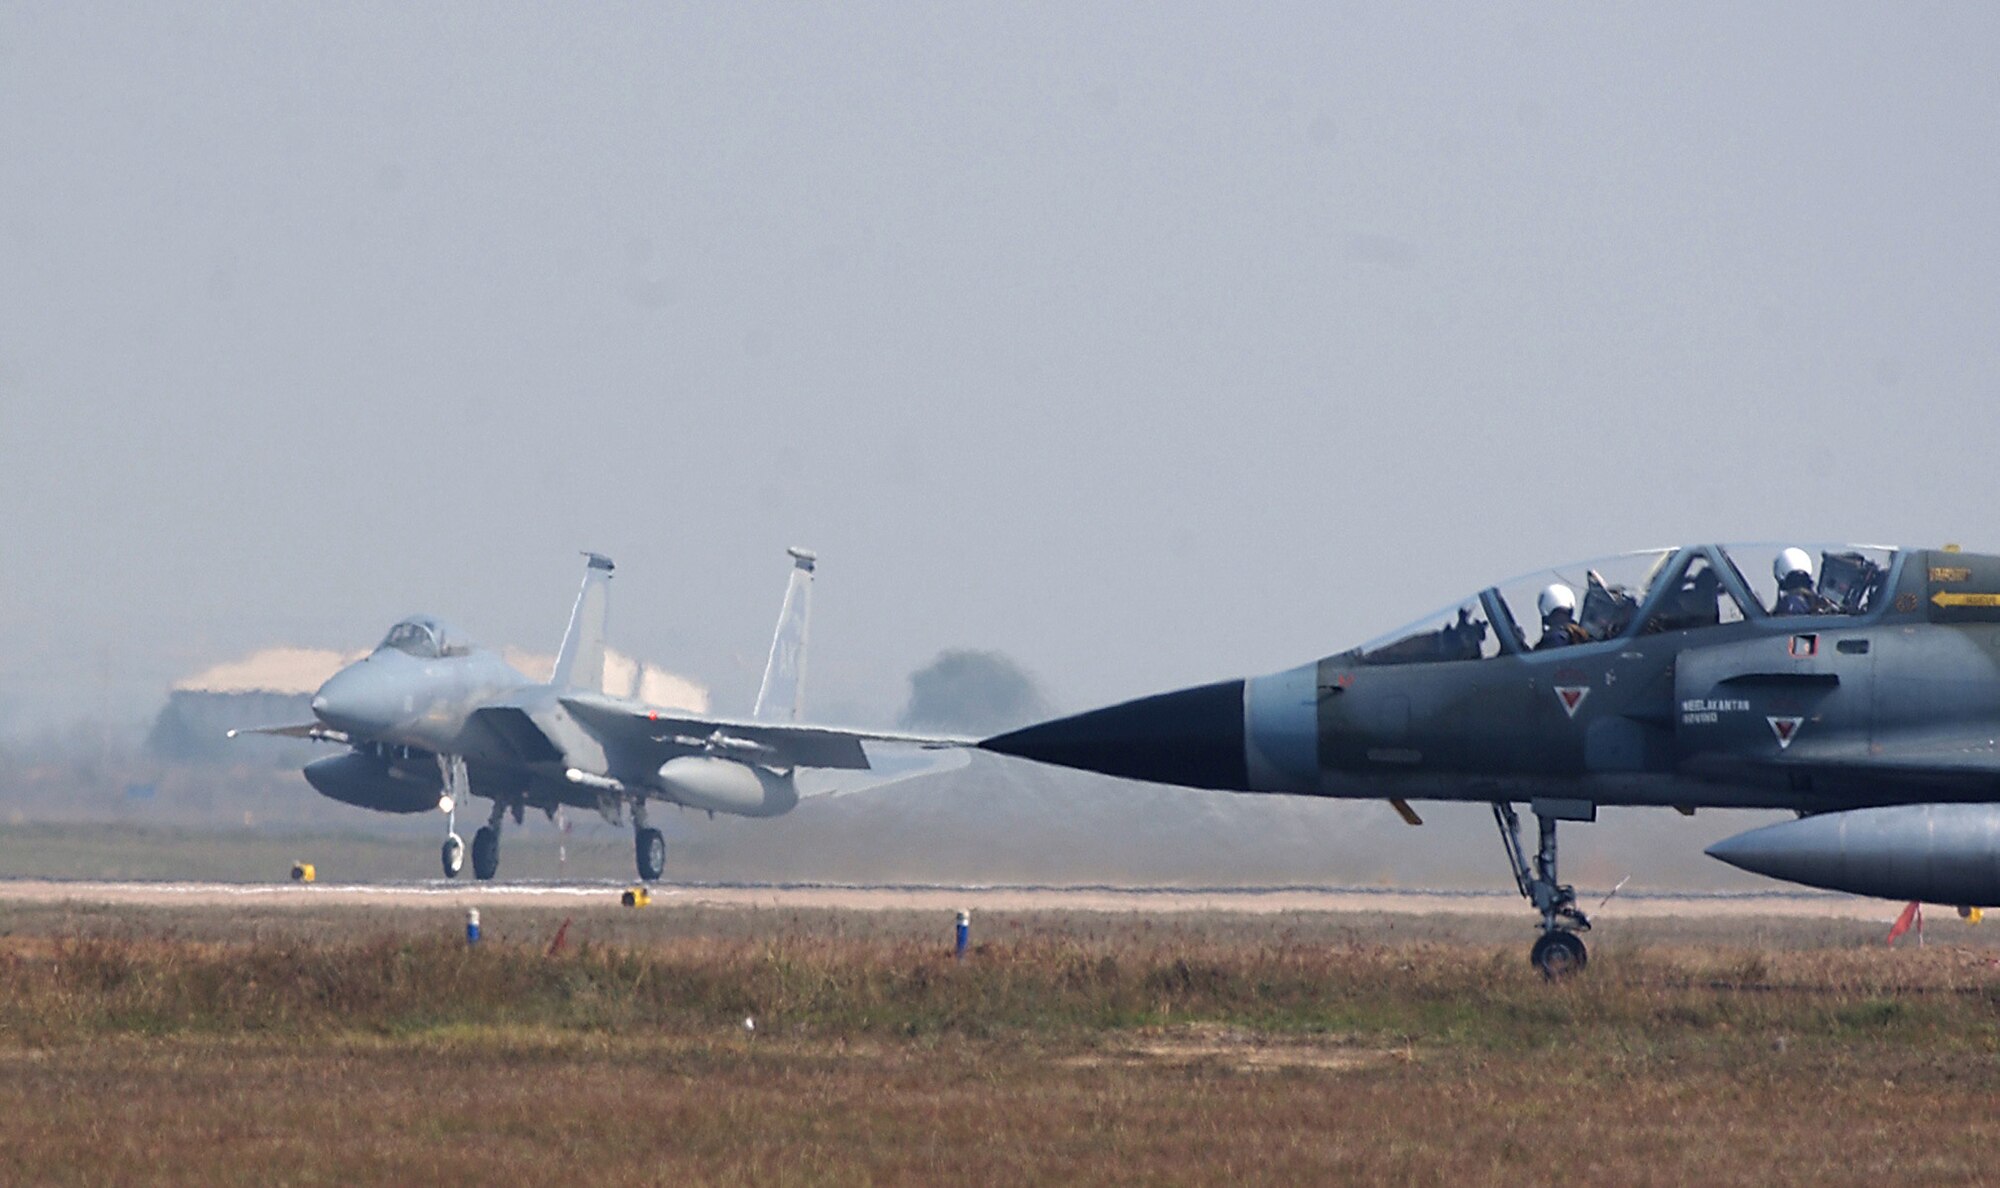 GWALIOR AIR FORCE STATION, India (AFPN) -- As an Indian air force M-2000 Mirage waits to taxi to the runway, a U.S. Air Force F-15 Eagle takes off.  Both American and Indian air forces are participating in Cope India 04, a bilateral dissimilar air combat exercise.  (U.S. Air Force photo by Tech. Sgt. Keith Brown)